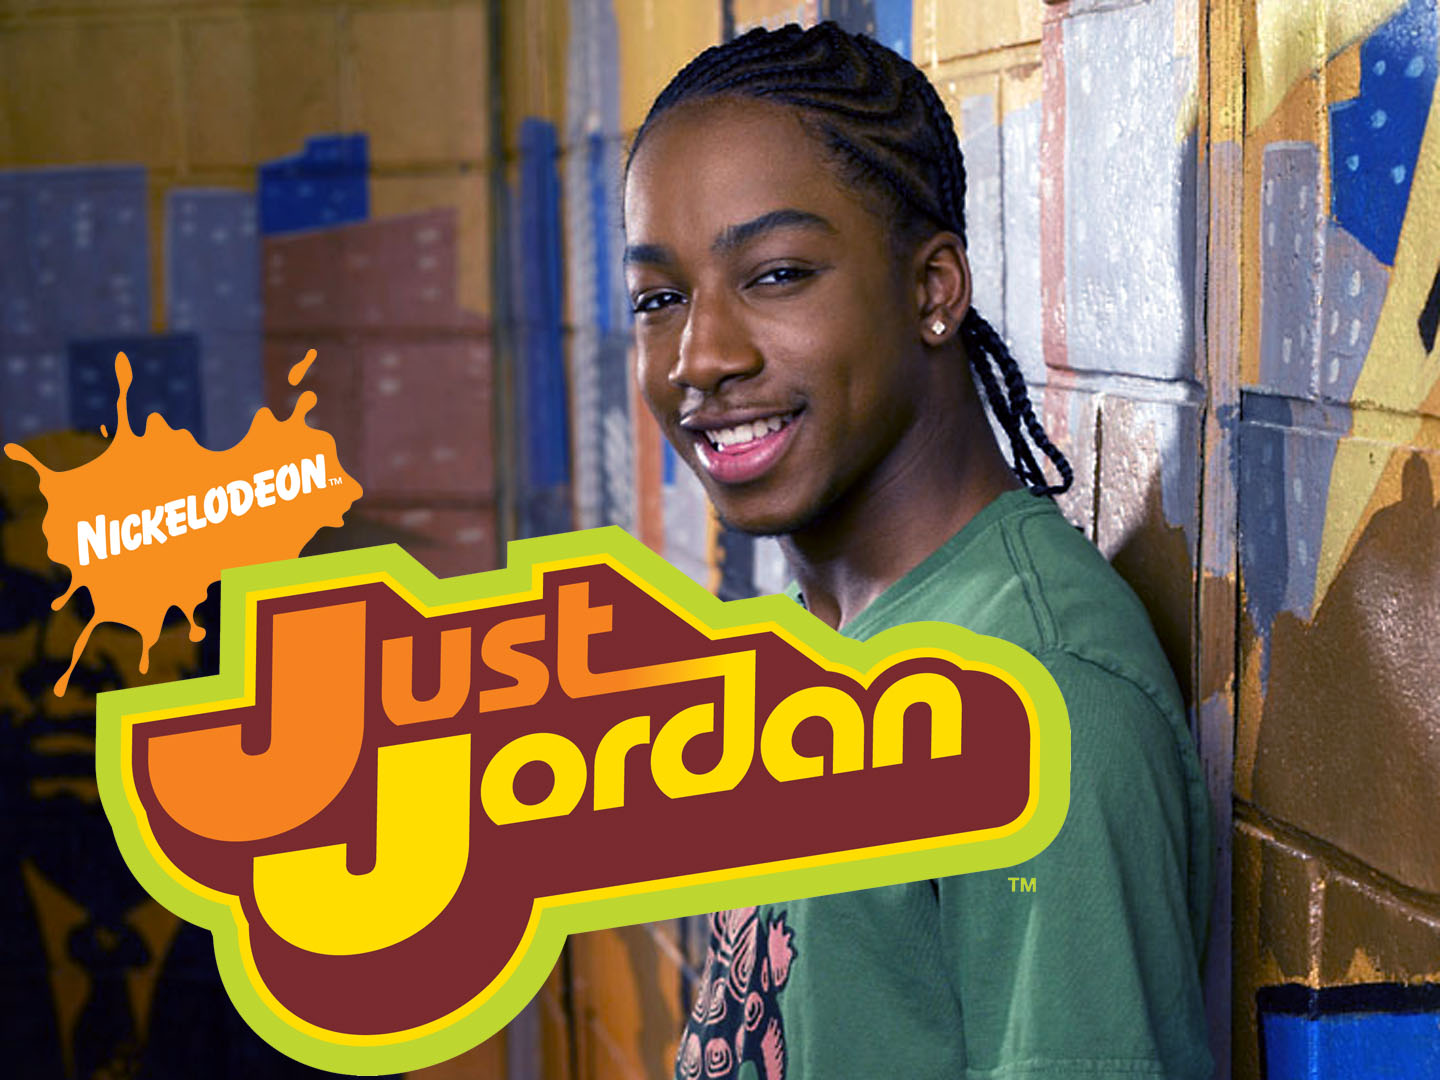 Just Jordan - Nickipedia - All about Nickelodeon and its many productions1440 x 1080